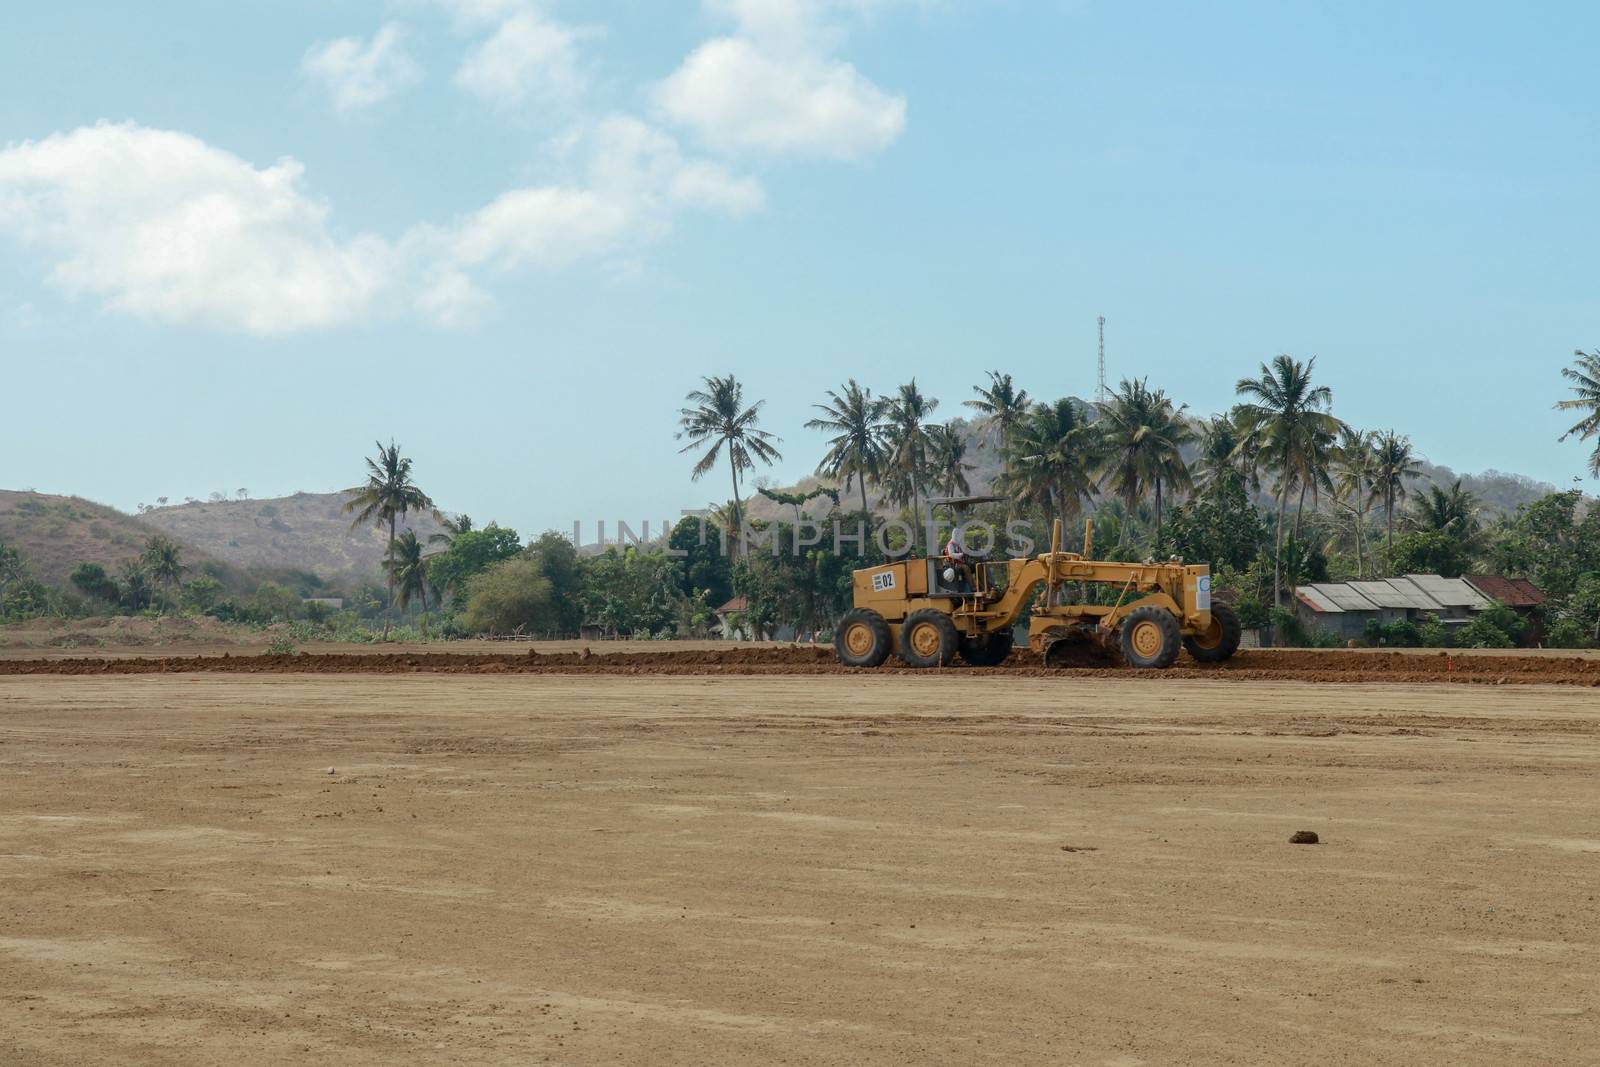 Working machines and heavy equipment adjust the terrain of the race track. Construction of the area and the Moto GP Mandalika racing circuit, West Nusa Tenggara, Lombok, Indonesia. Building a racetrack for motorcycles.